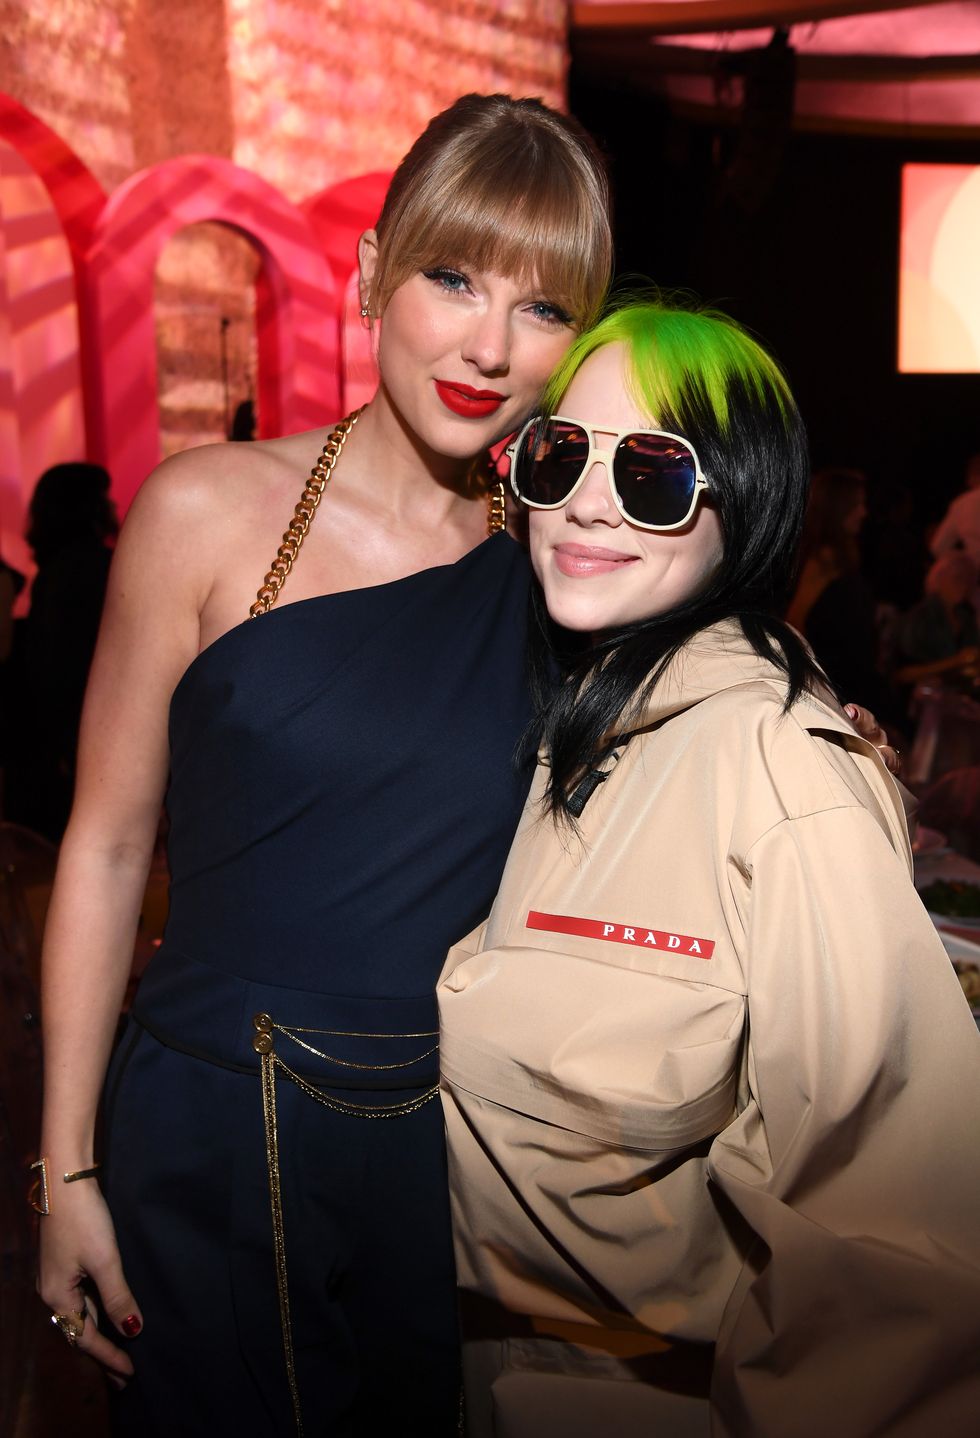 los angeles, california december 12 l r taylor swift and billie eilish attend billboard women in music 2019, presented by youtube music, on december 12, 2019 in los angeles, california photo by kevin mazurgetty images for billboard